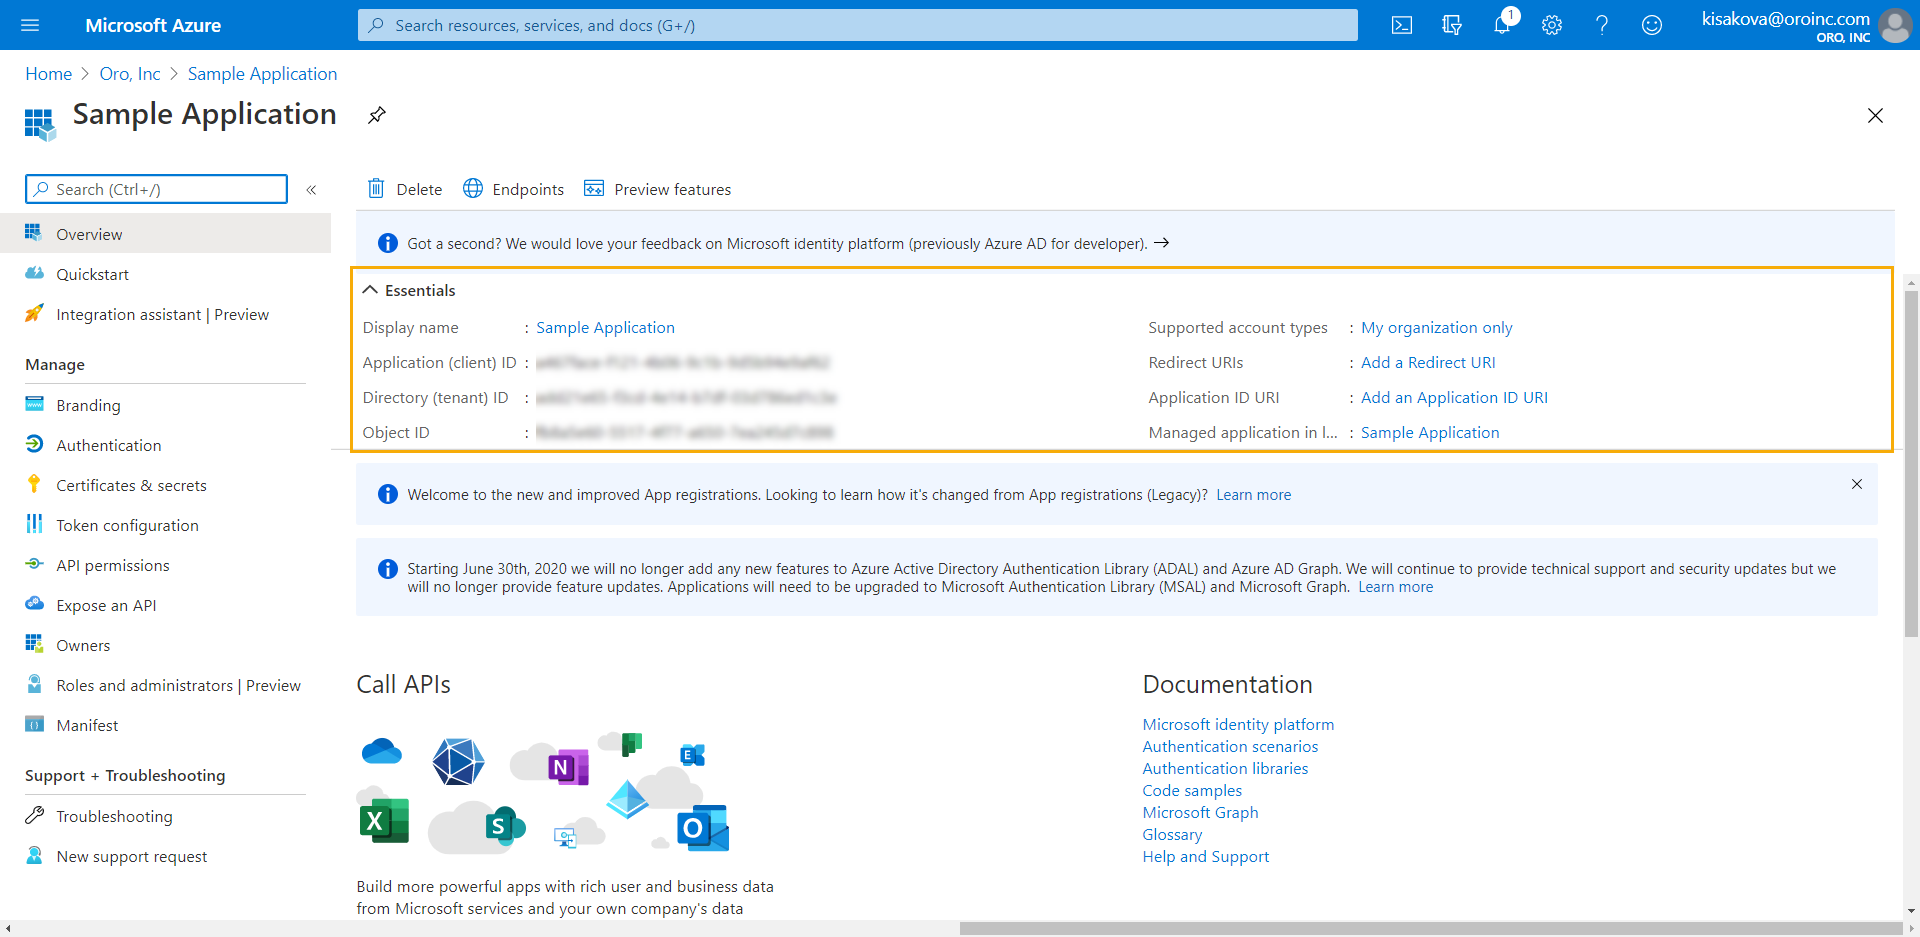 Essentials section on the main page displaying application credentials such as client id, directory id.